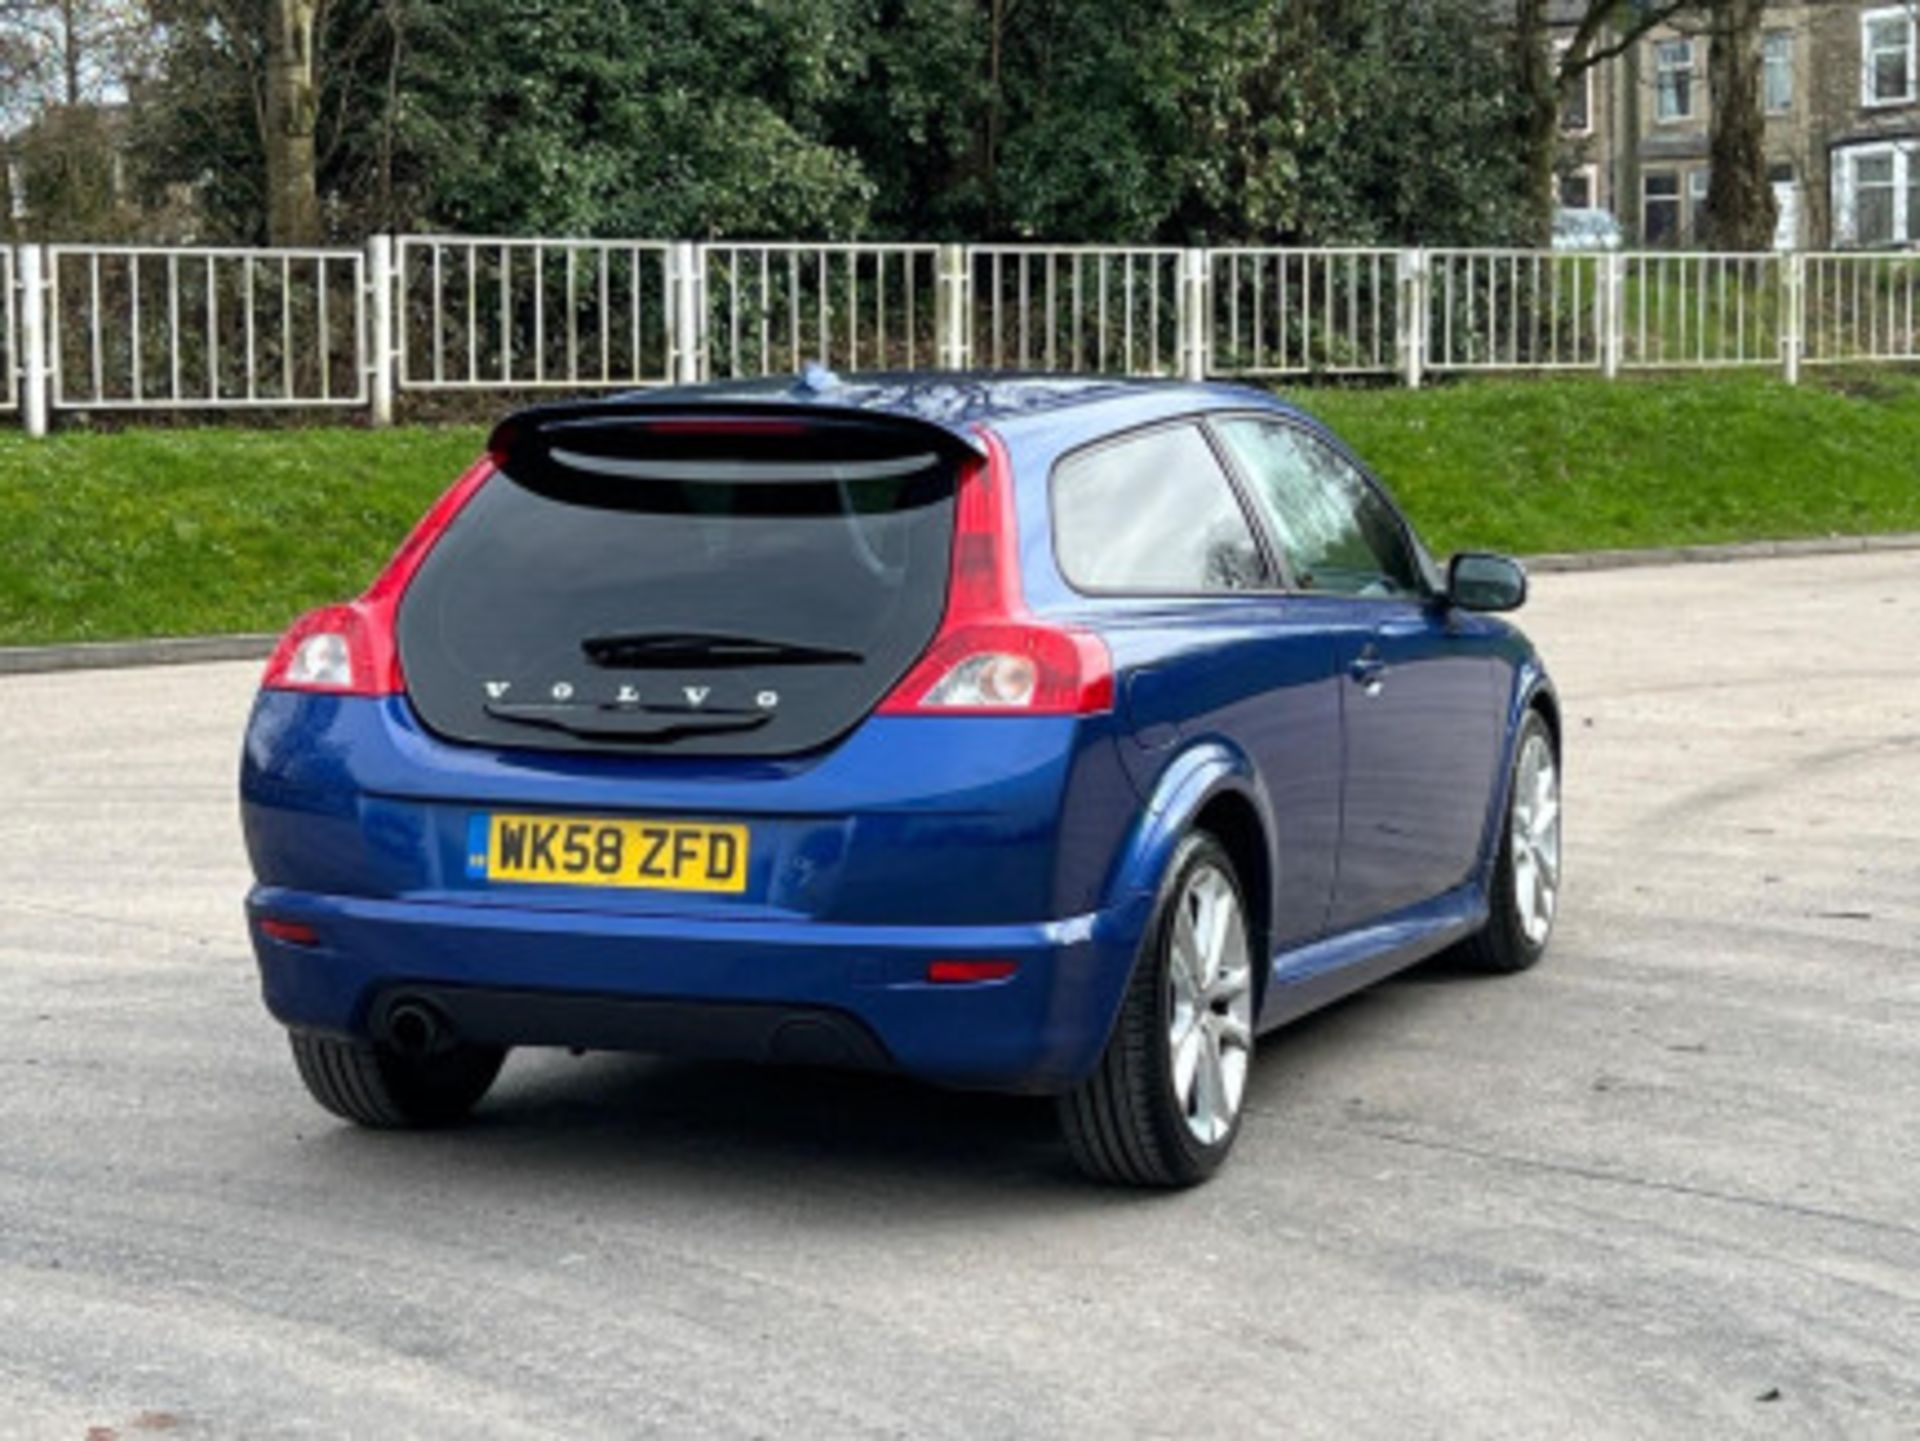 VOLVO C30 2.0D R-DESIGN SPORT 2DR - SPORTY AND LUXURIOUS COMPACT CAR >>--NO VAT ON HAMMER--<< - Image 40 of 103